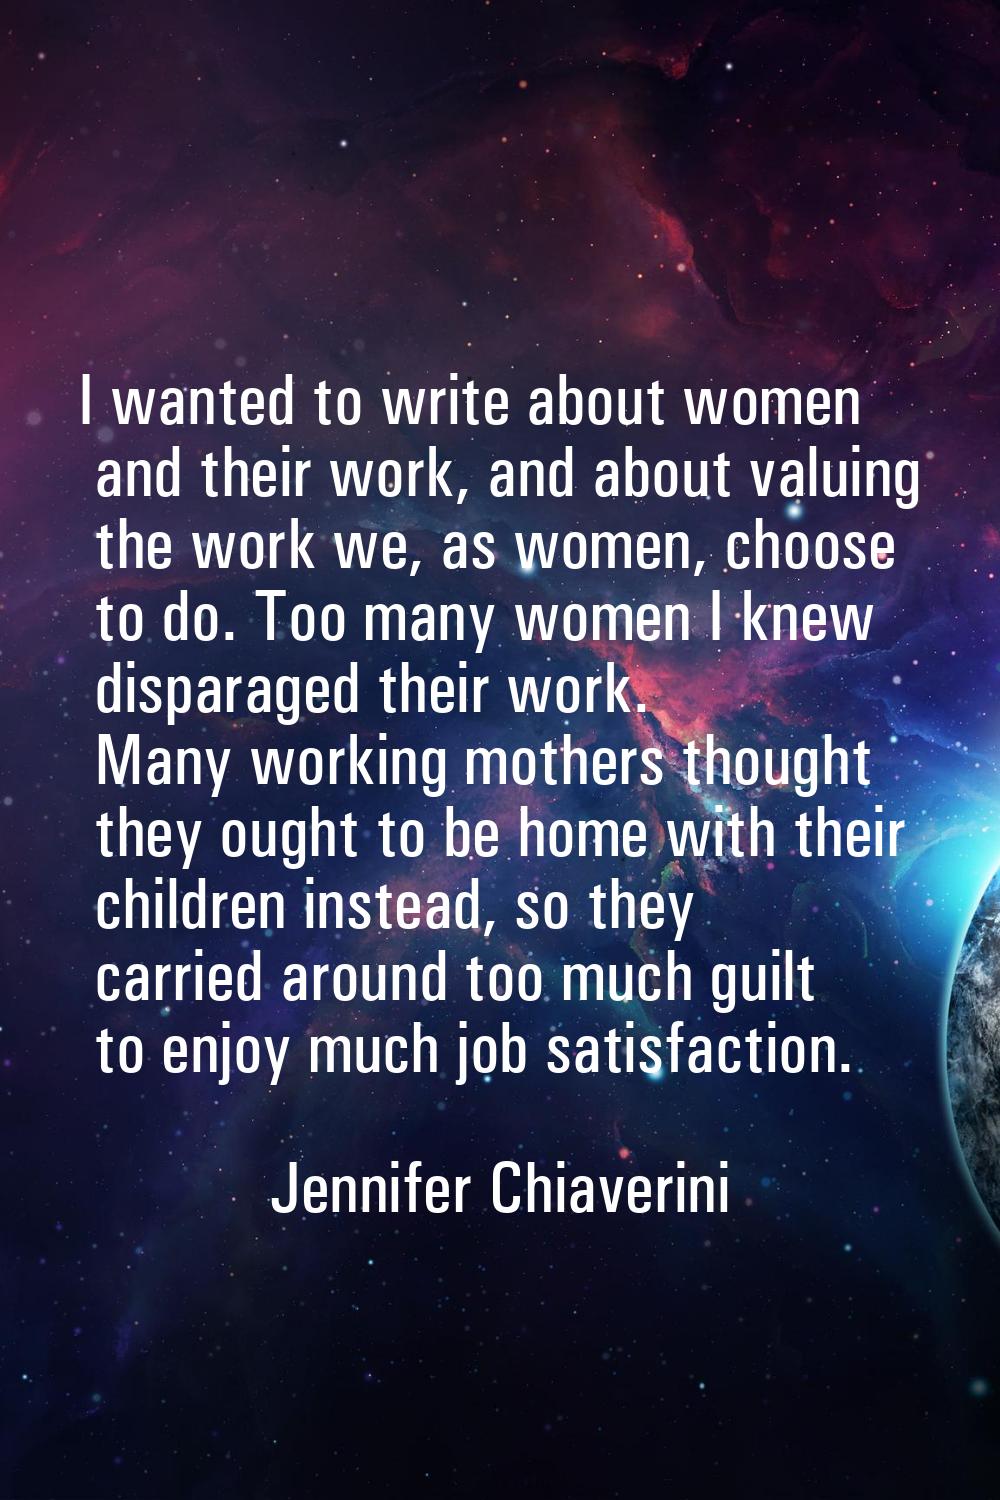 I wanted to write about women and their work, and about valuing the work we, as women, choose to do